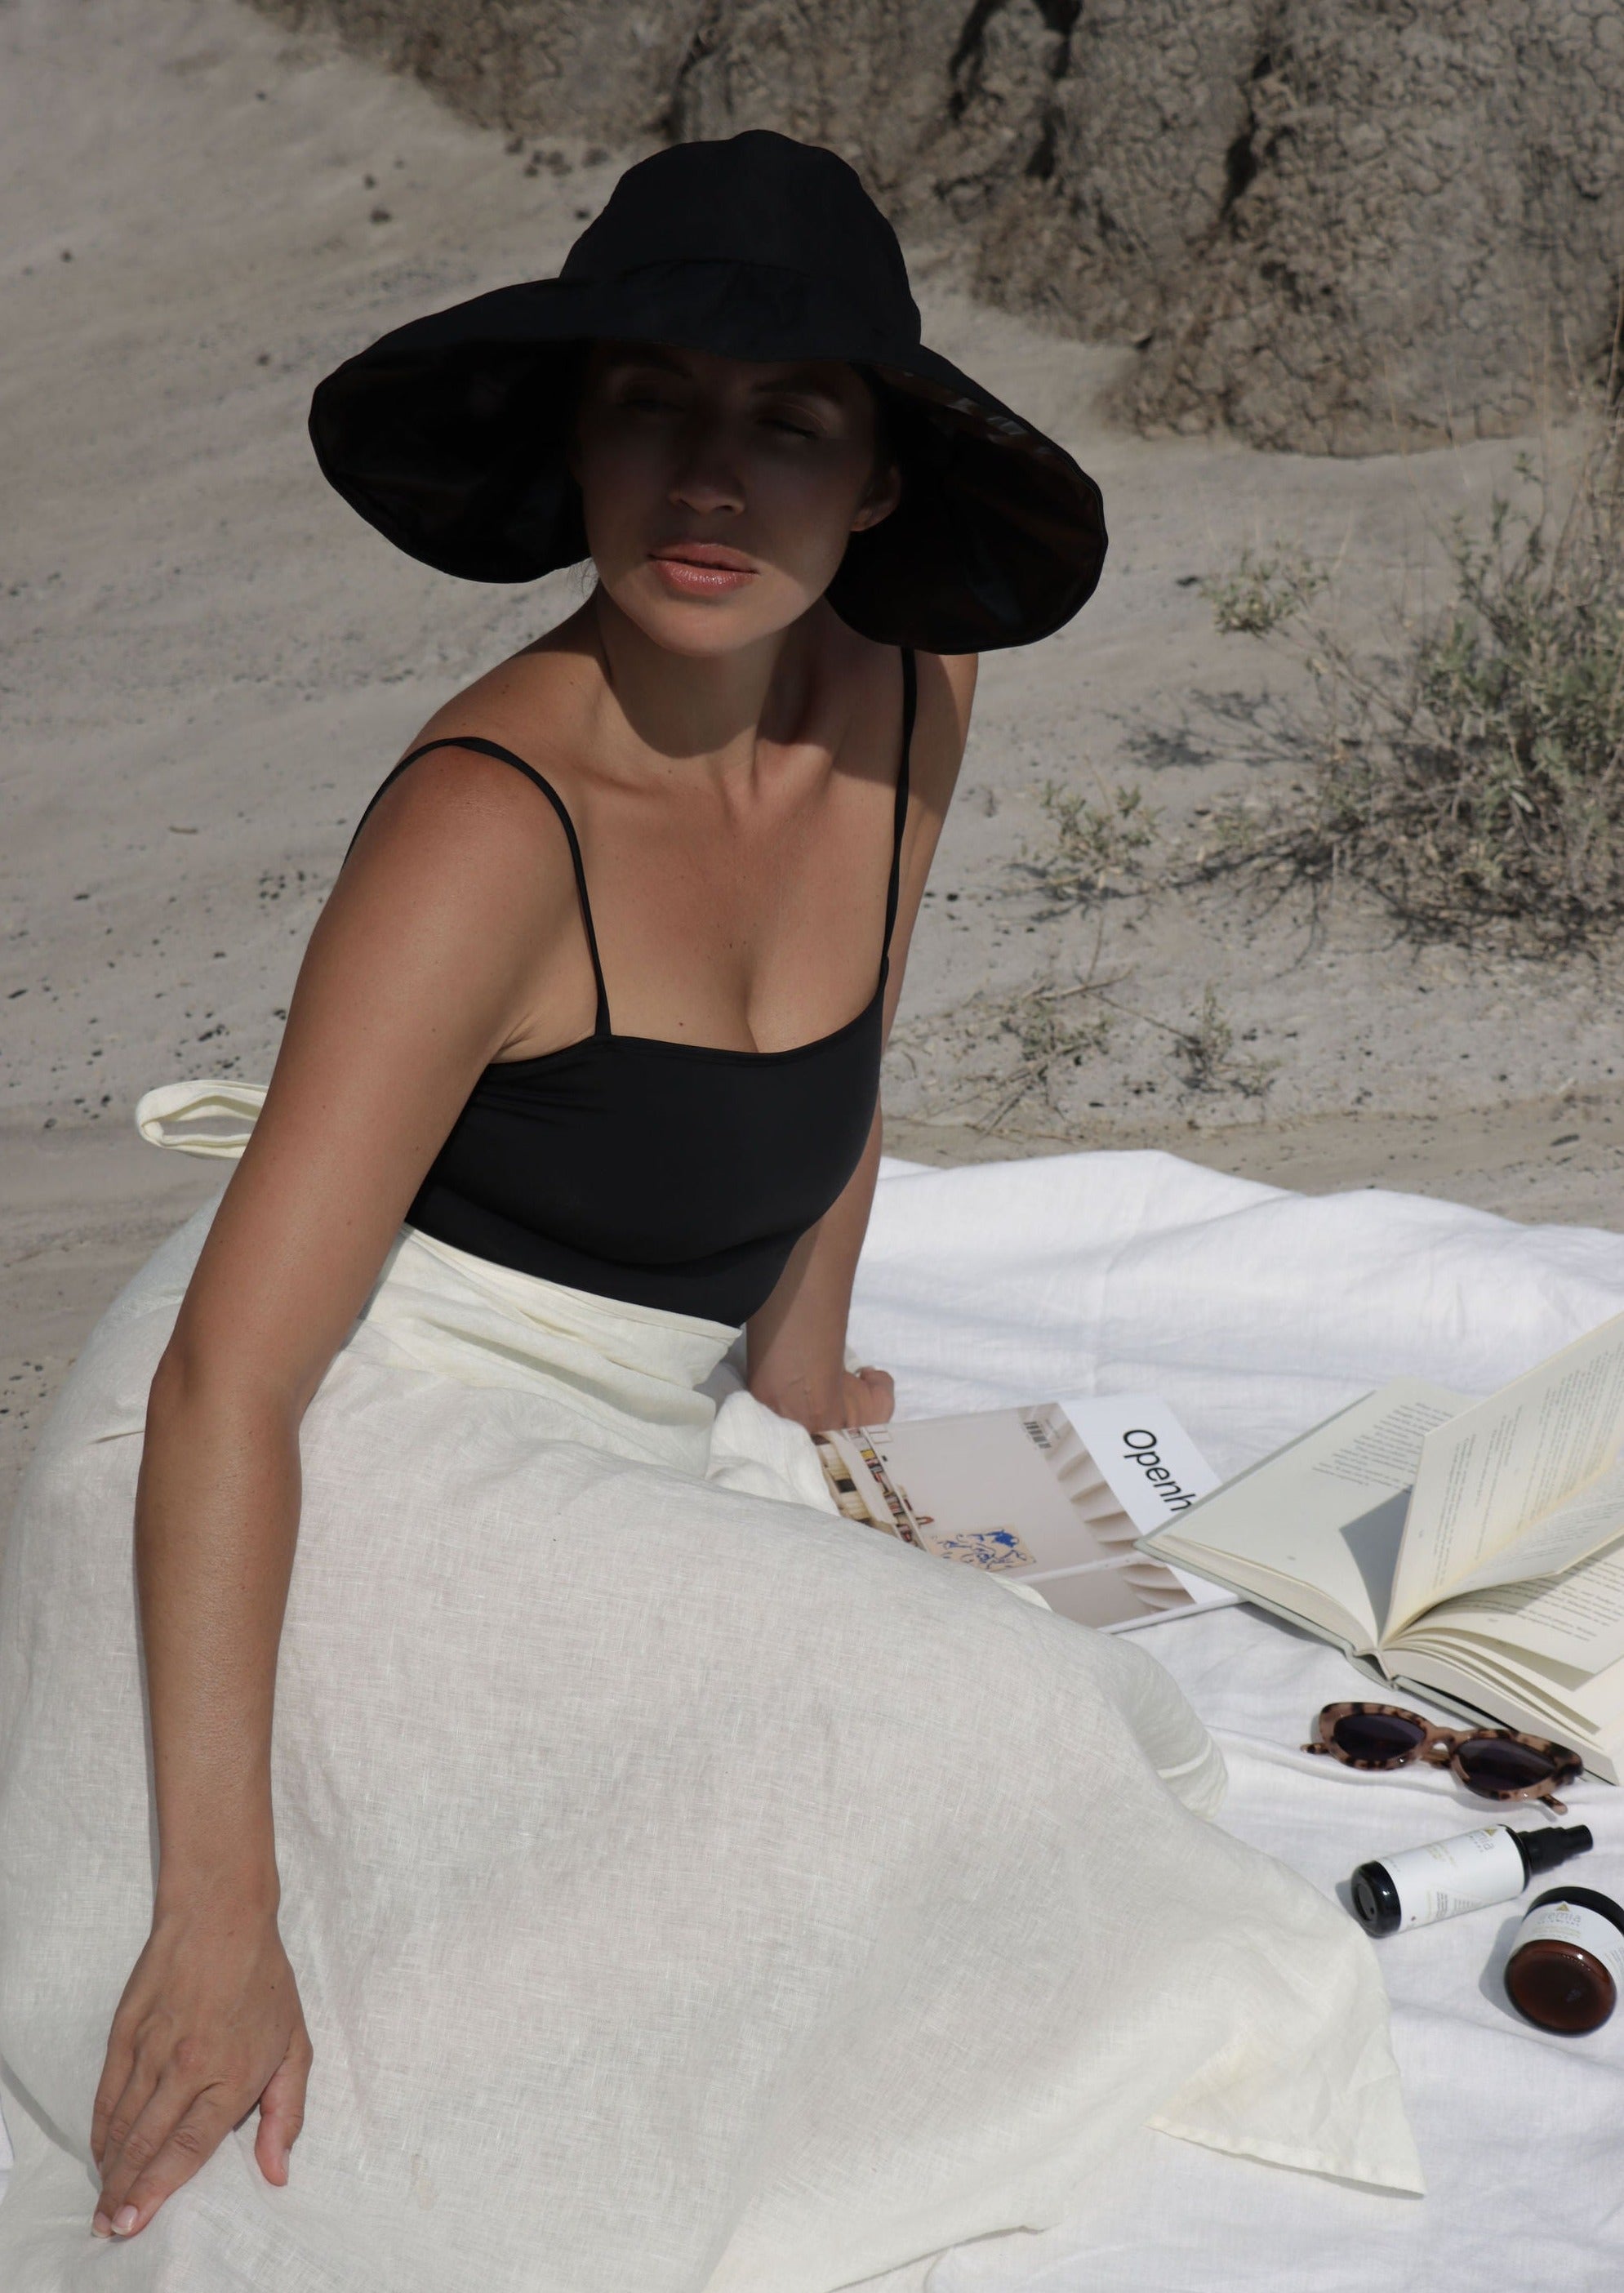 UV blocking sun hat that is adjustable to fit you perfectly. Features an opening at the back for a ponytail or whatever hair style you choose. Rolls up and is completely packable and light, perfect for travel or daily use for sun protection.